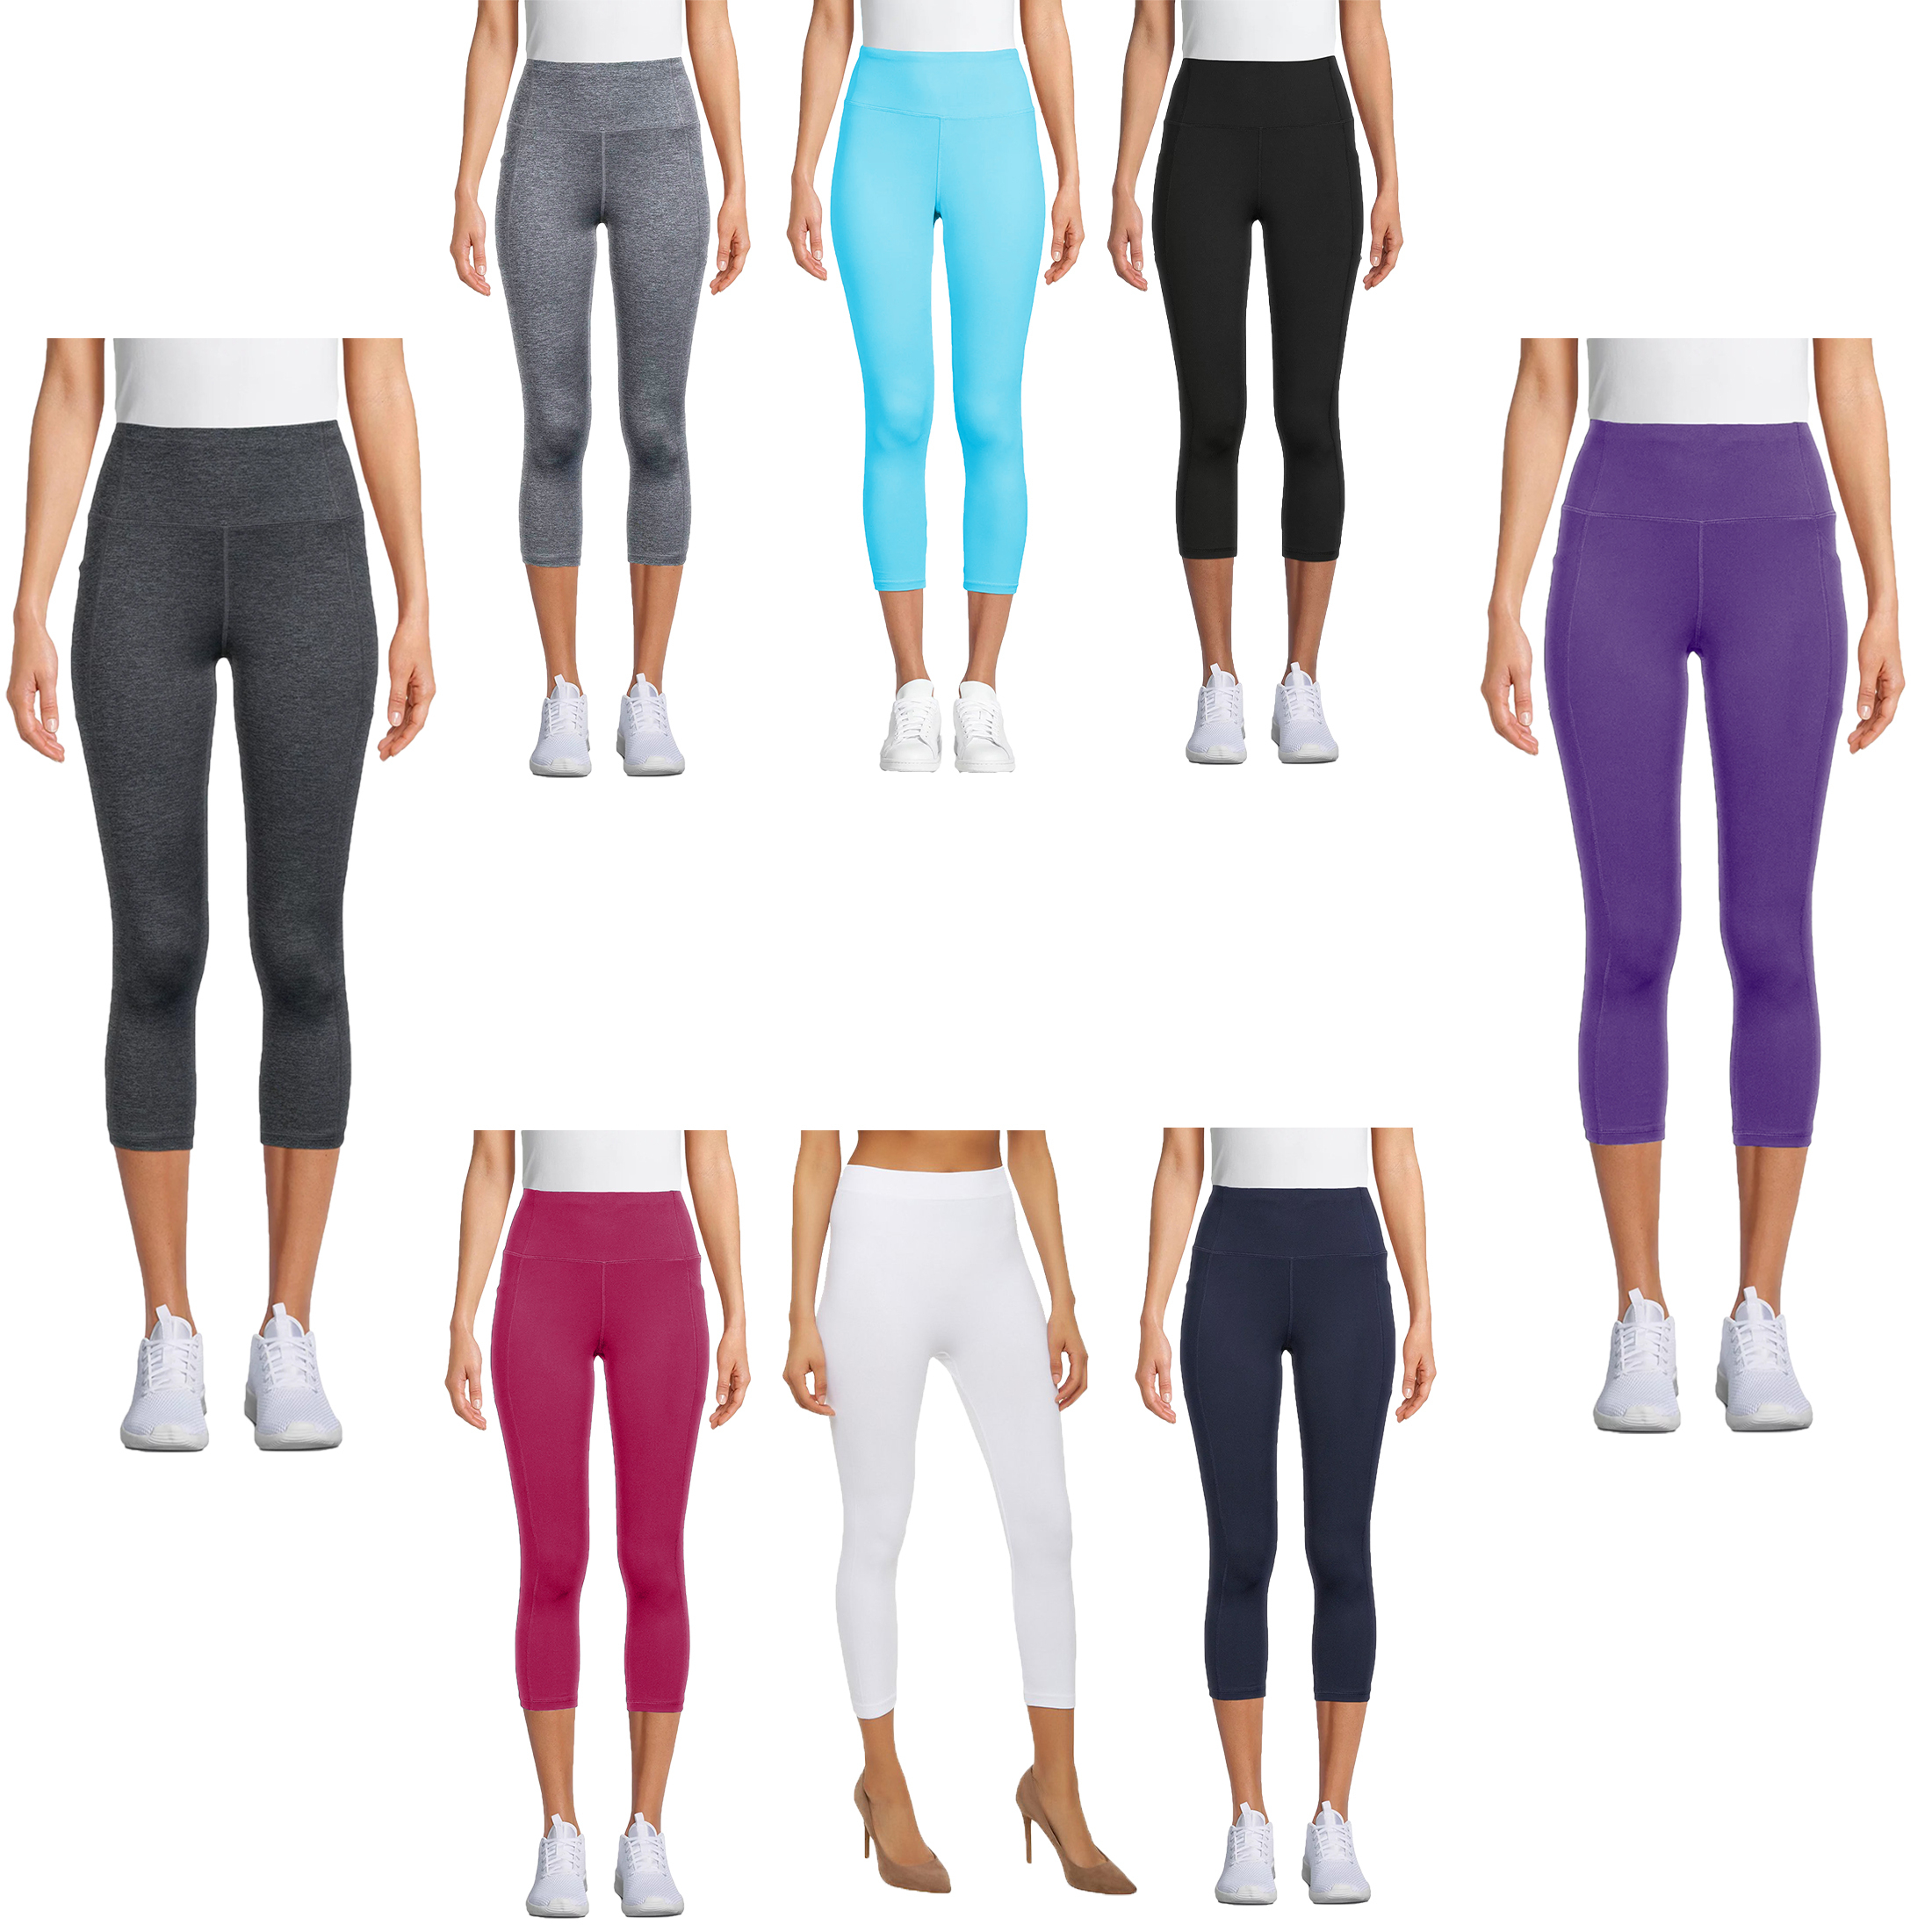 6-Pack: Ladies High Waisted Solid Basic Ultra Soft Active Workout Capri Leggings - S